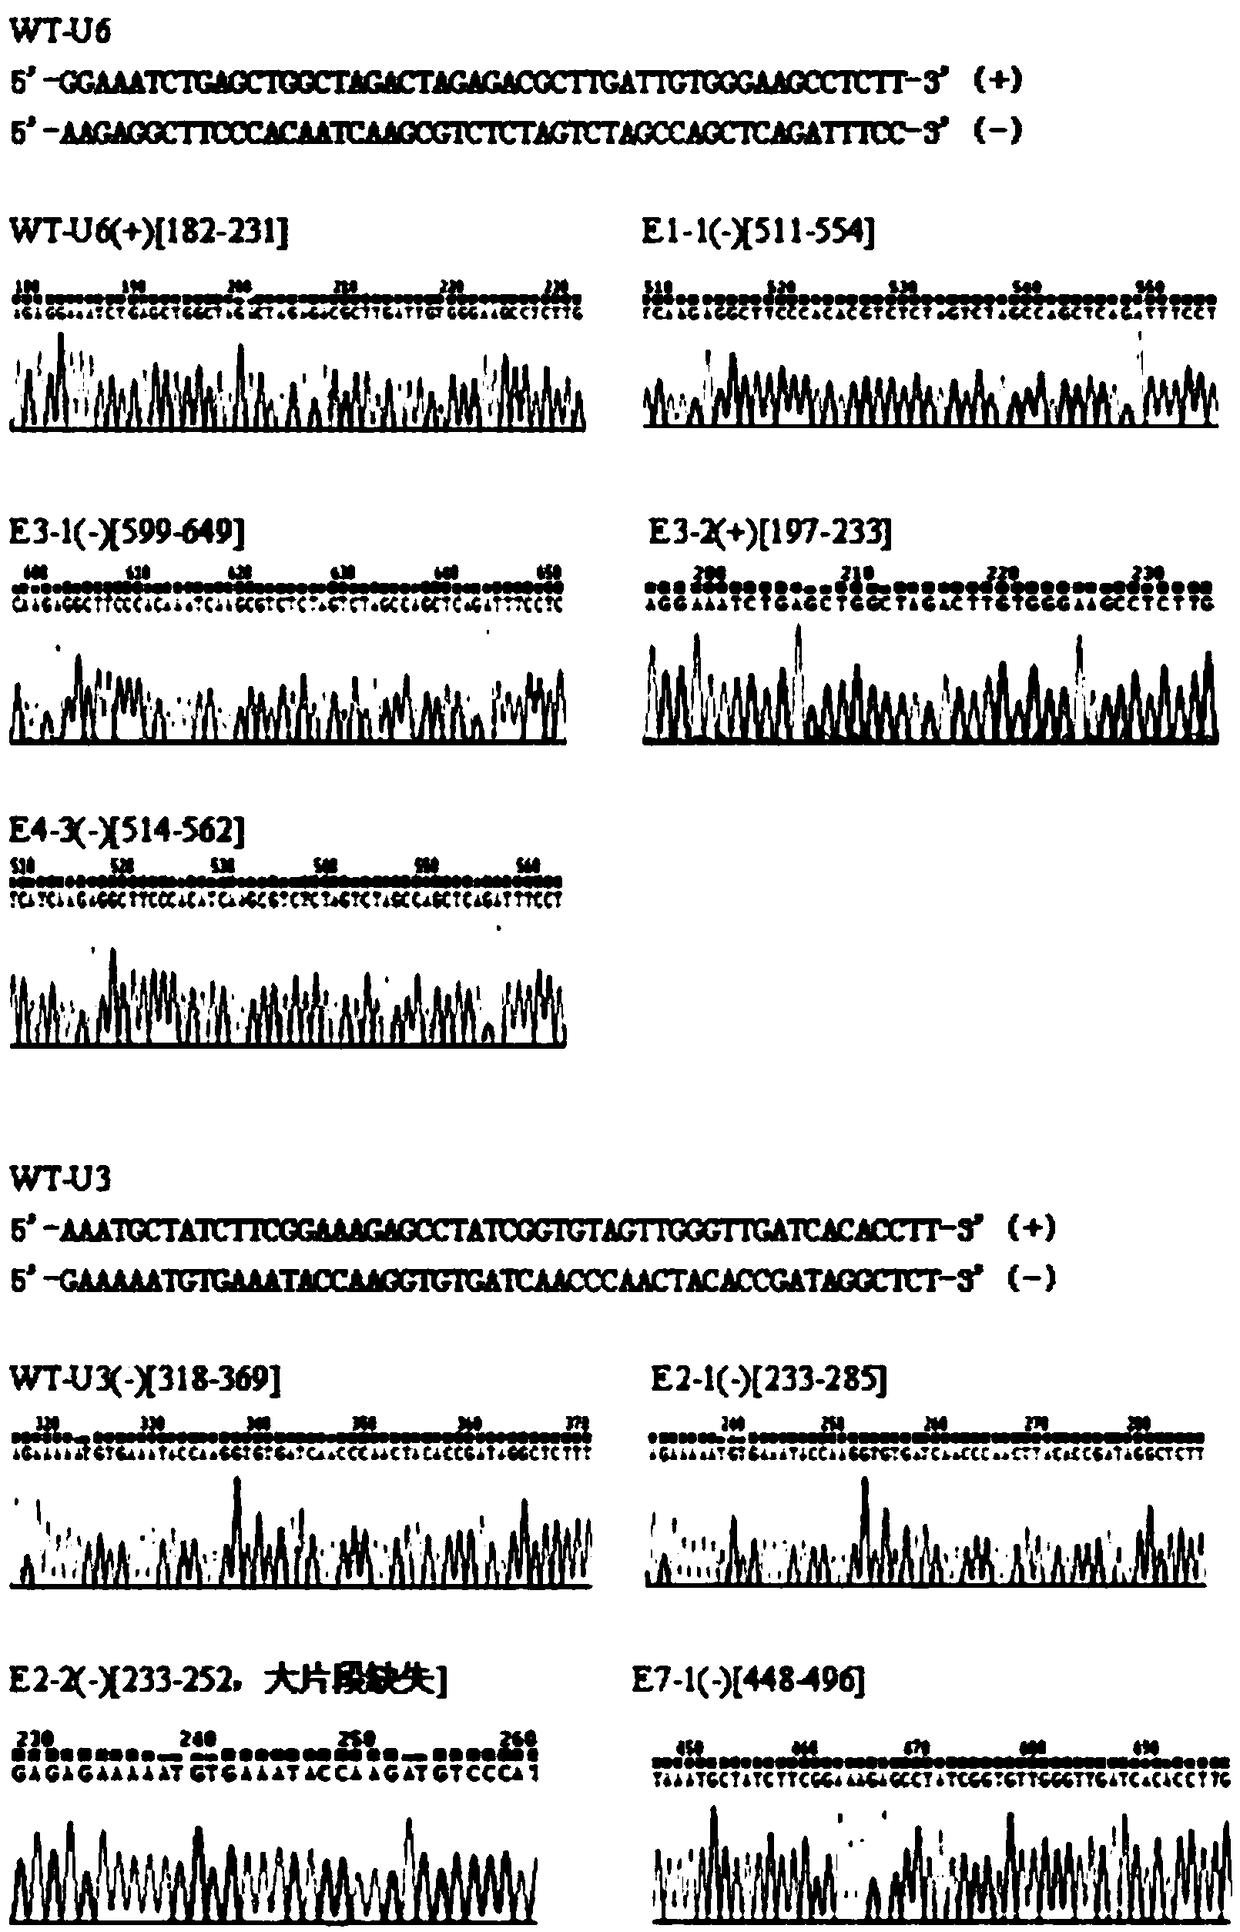 Method for creating fragrant rice by knocking out BADH2 (betaine aldehyde dehydrogenase) gene by utilizing CRISPR/Cas9 system